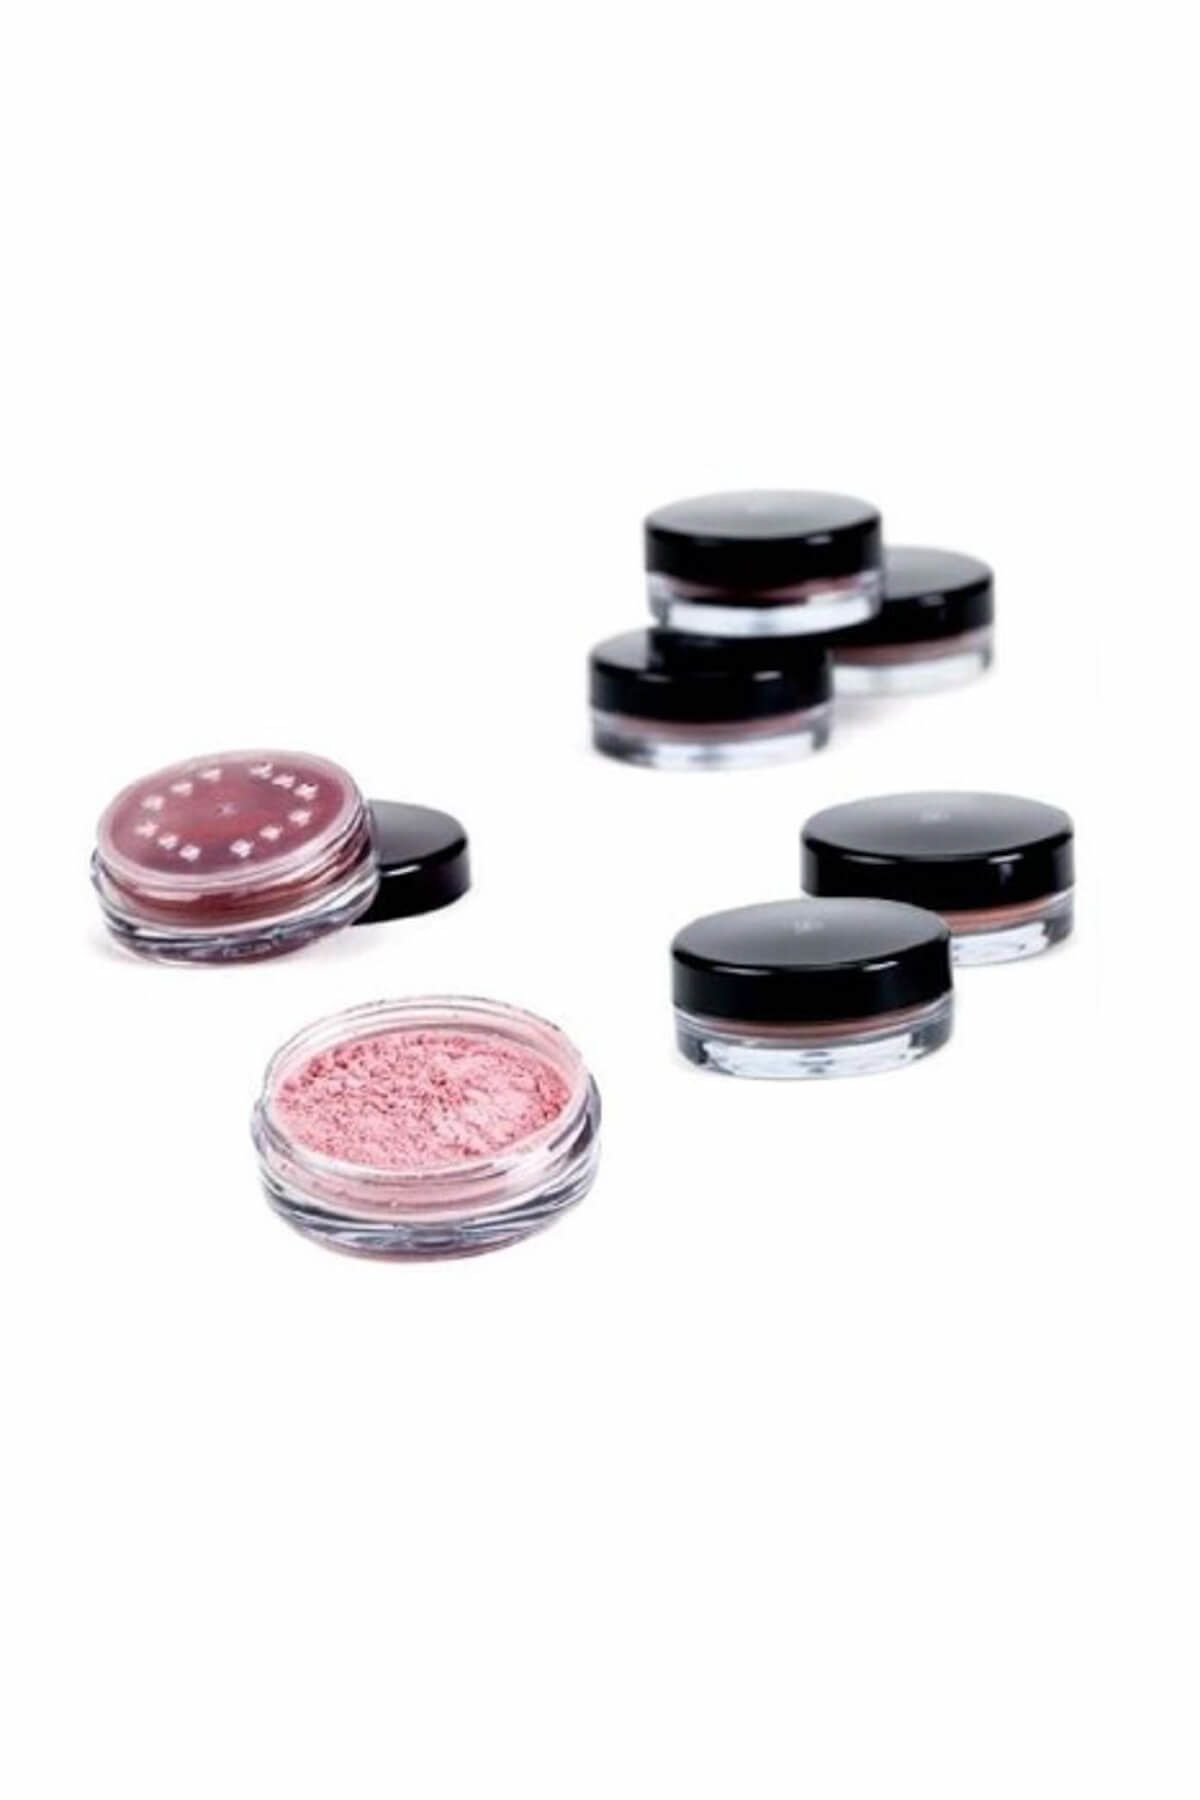 Youngblood Mercan Rengi Toz Mineral Allık - Crushed Minral Blush Coral Reef 3 g 696137070025